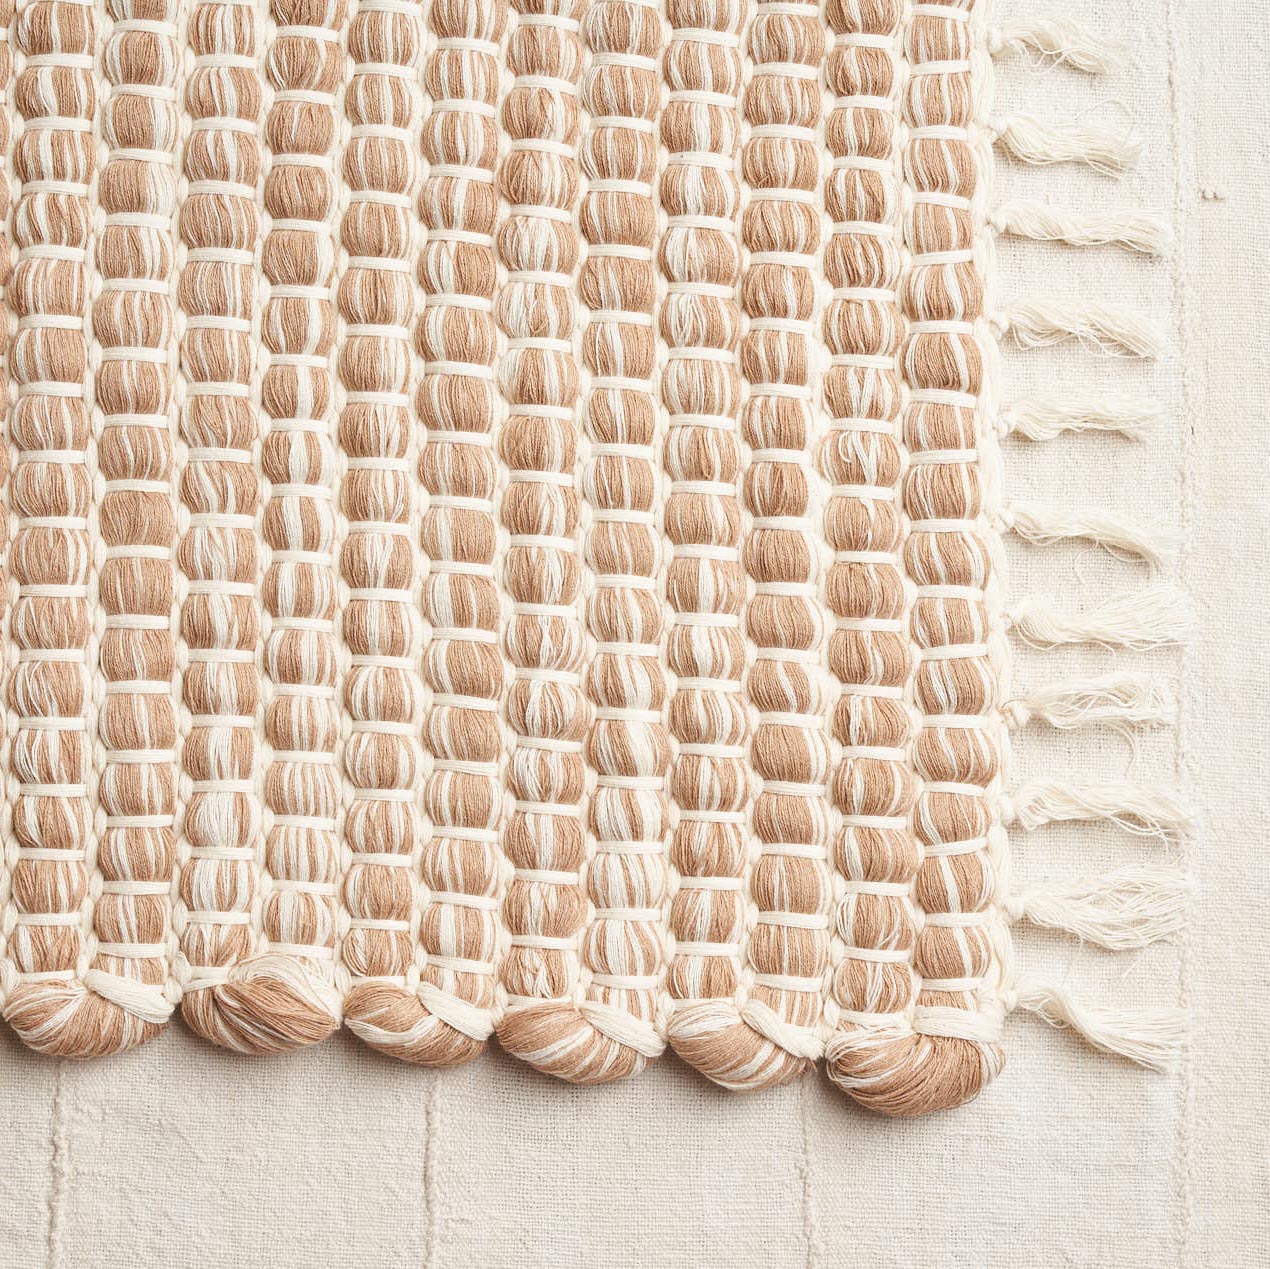 Handwoven Organic Cotton Rug, Undyed Camel Marble